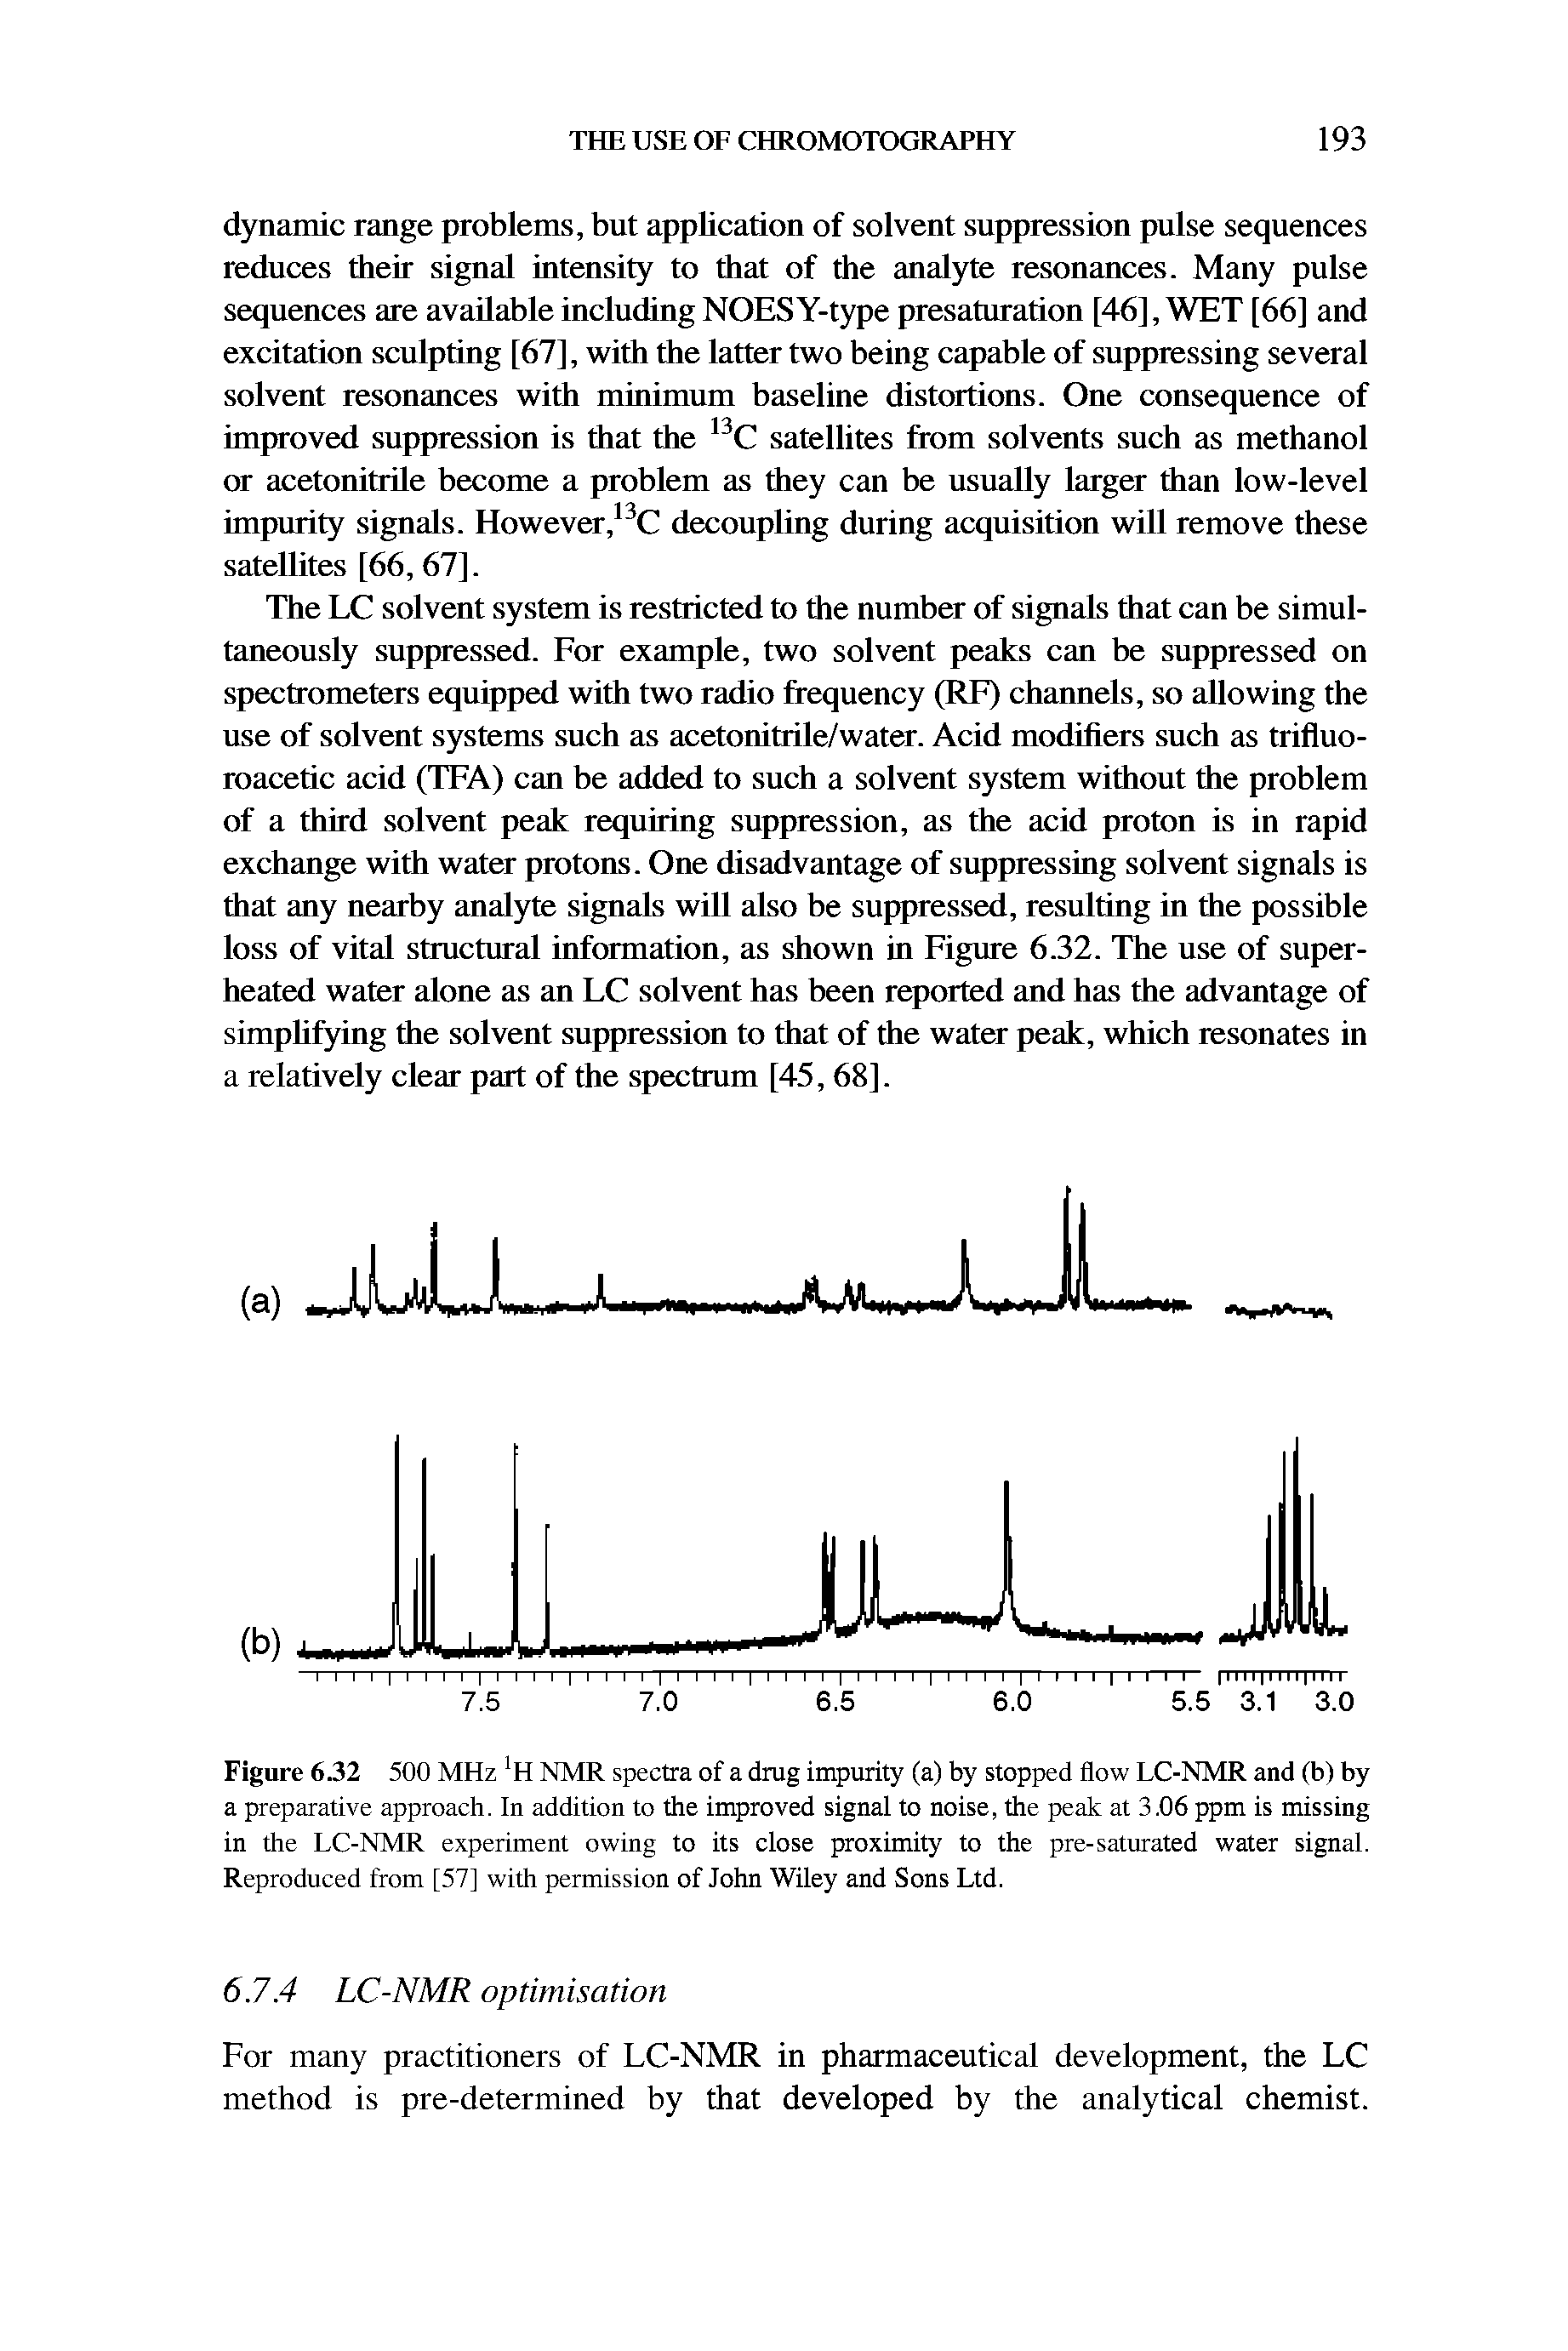 Figure 6.32 500 MHz H NMR spectra of a drug impurity (a) by stopped flow LC-NMR and (b) by a preparative approach. In addition to the improved signal to noise, the peak at 3.06 ppm is missing in the LC-NMR experiment owing to its close proximity to the pre-saturated water signal. Reproduced from [57] with permission of John Wiley and Sons Ltd.